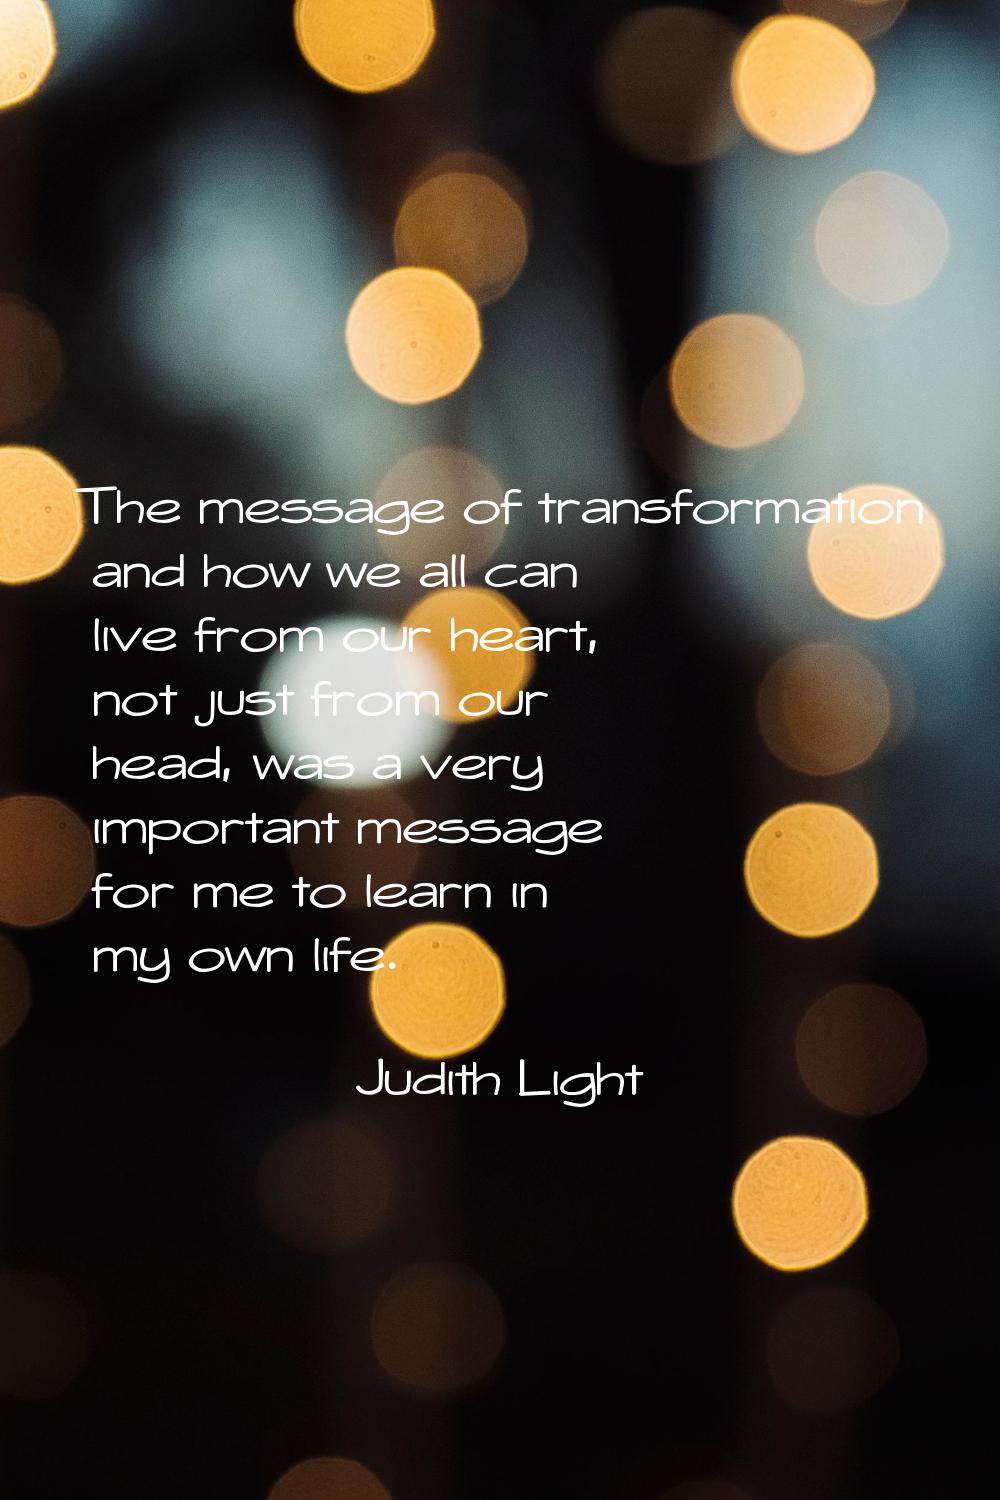 The message of transformation and how we all can live from our heart, not just from our head, was a